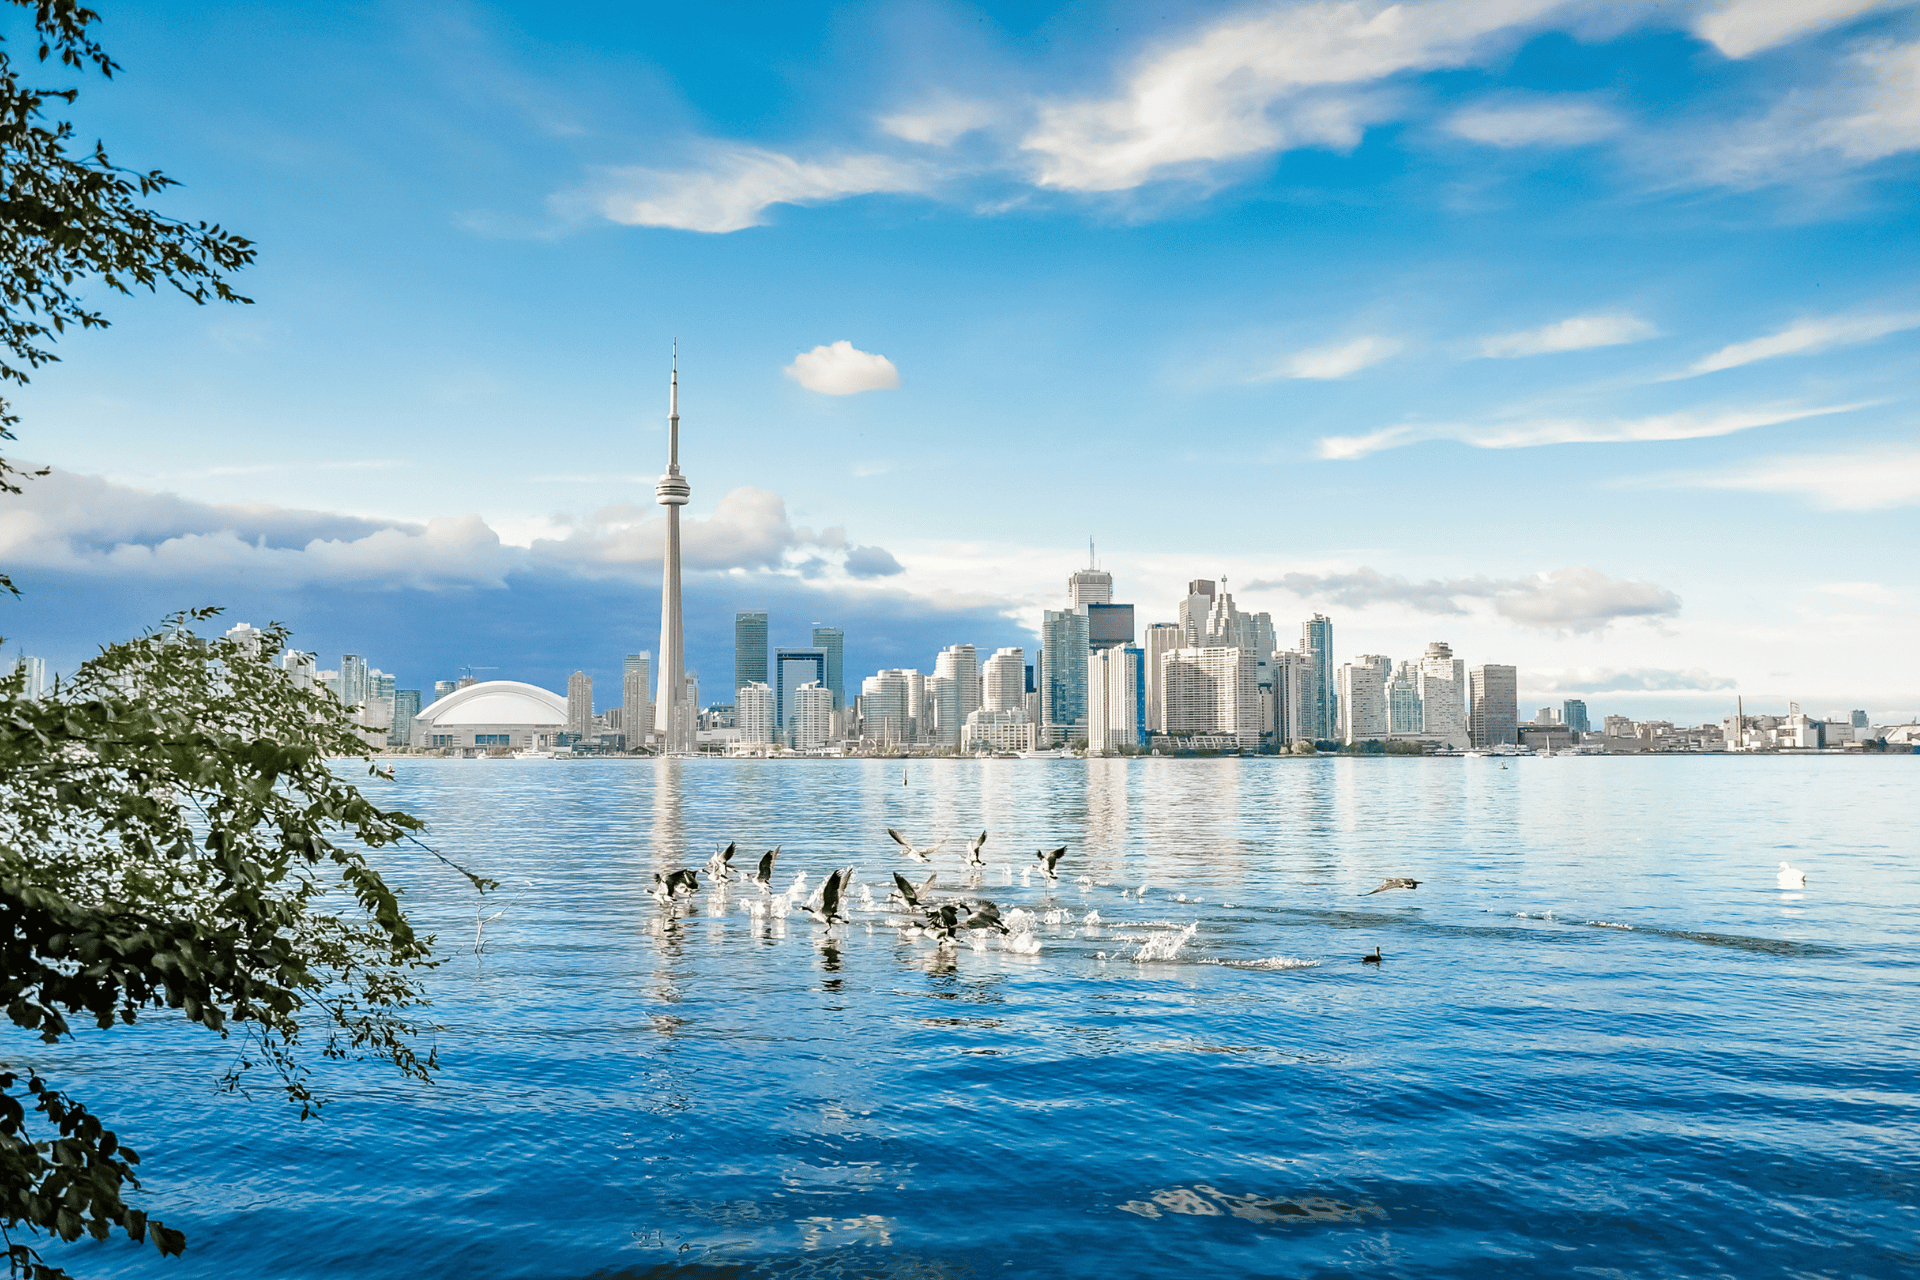 Toronto city, Canada surangaw from Getty Images Pro